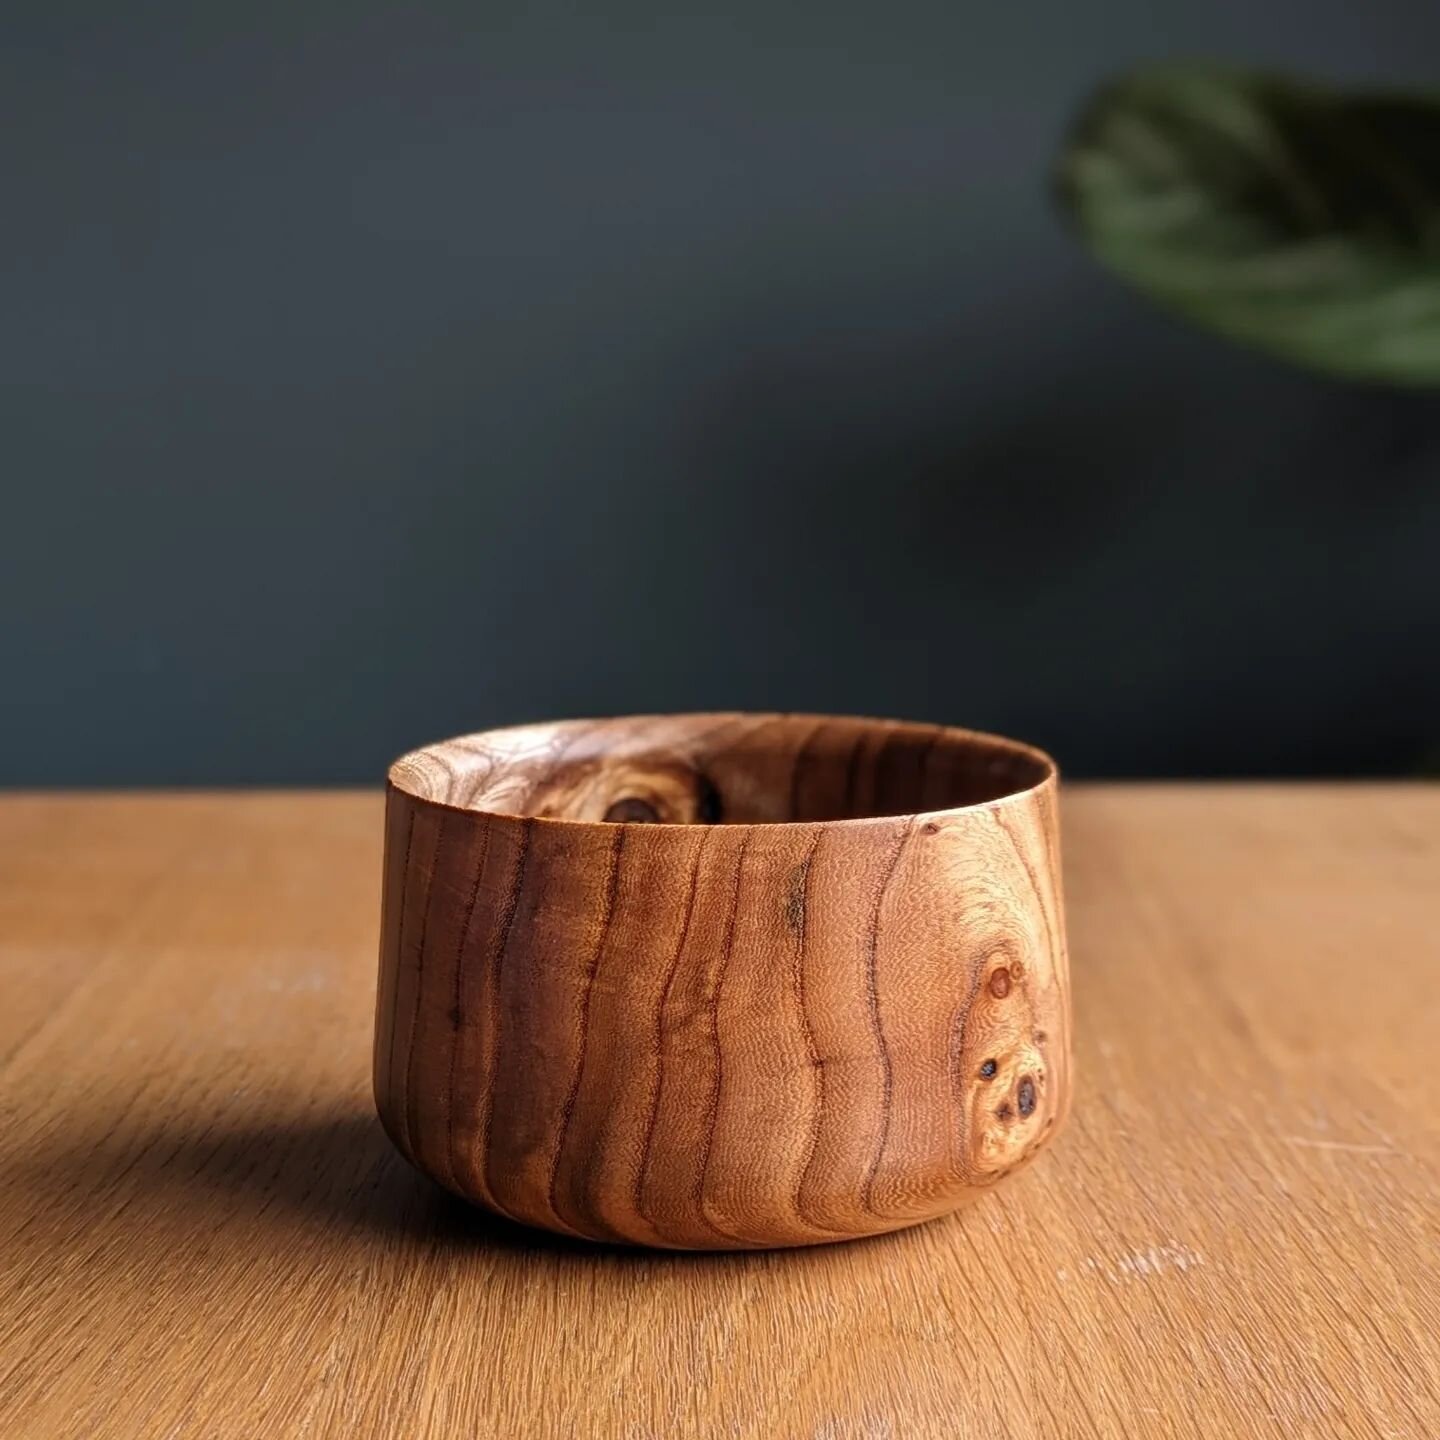 A new Elm pot with some nice character to it. Finished with Tung oil. Shame Elm can be harder to come by thanks to Dutch Elm disease. It's a lovely wood... in my humble opinion.